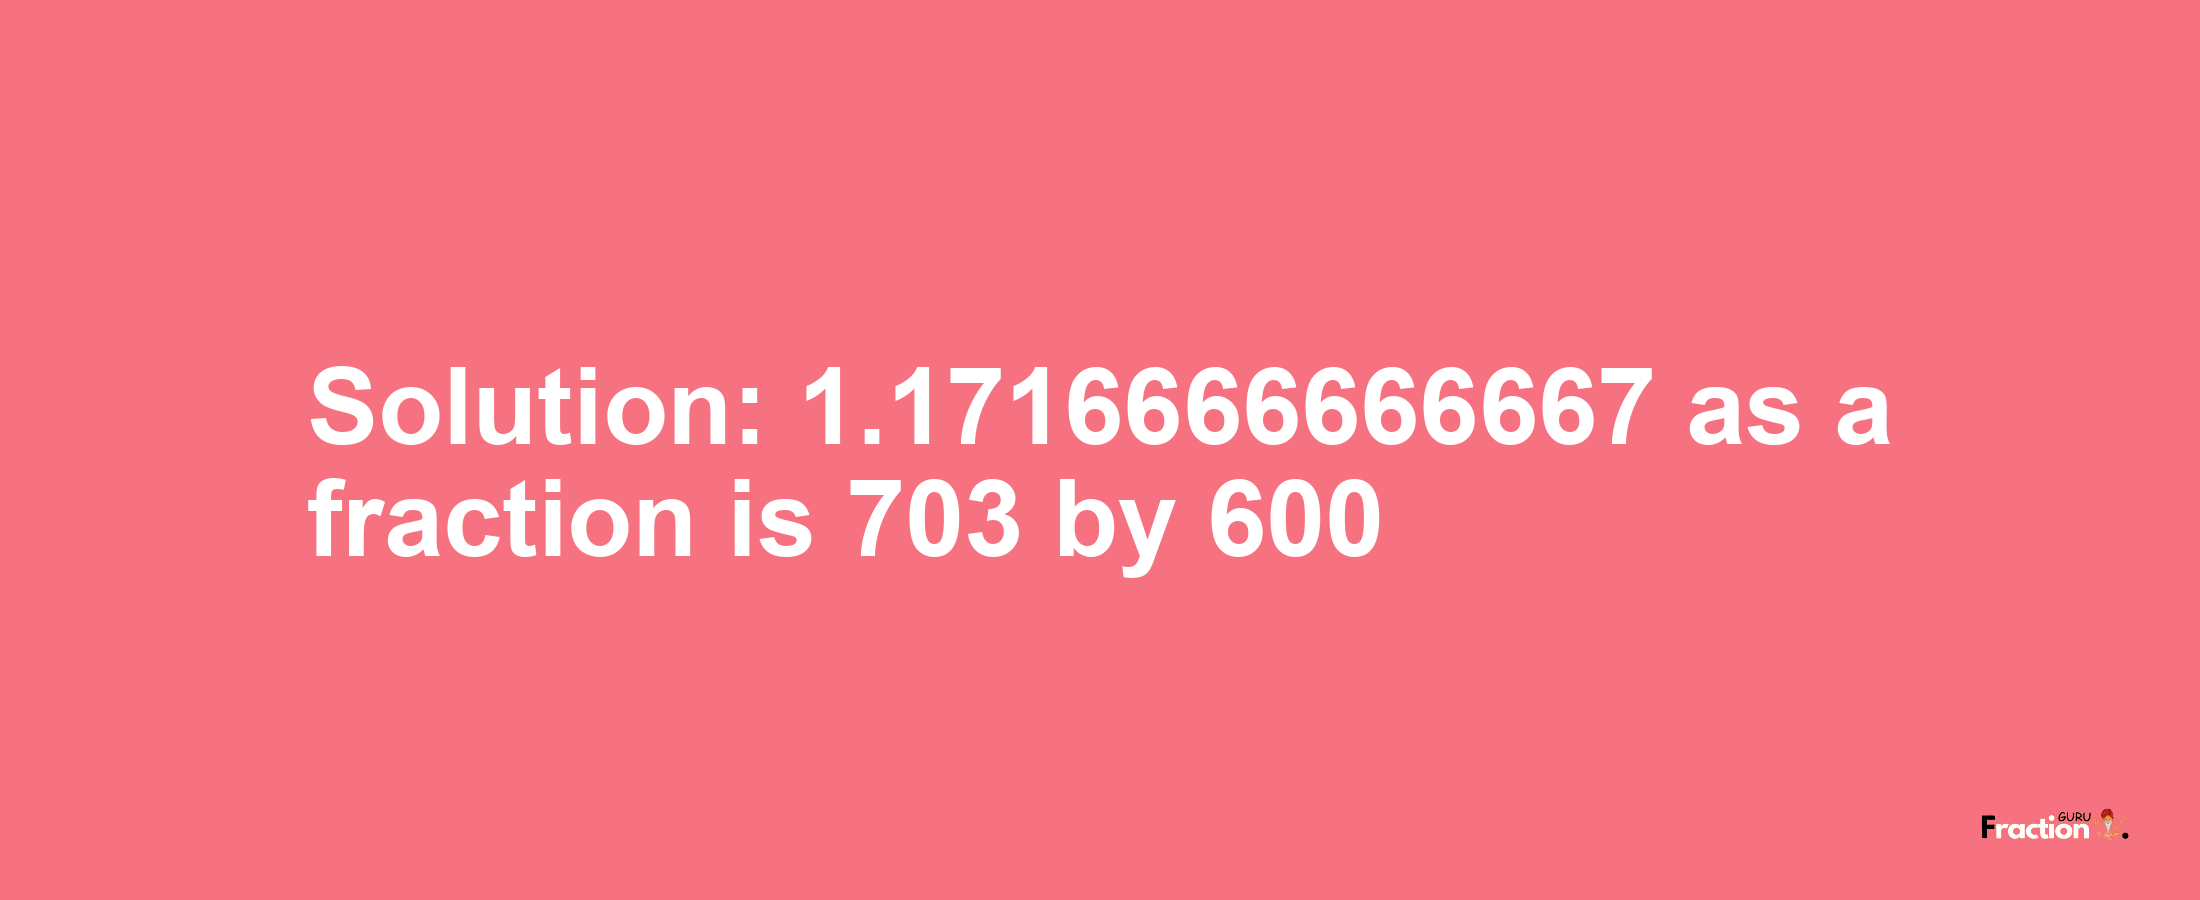 Solution:1.1716666666667 as a fraction is 703/600